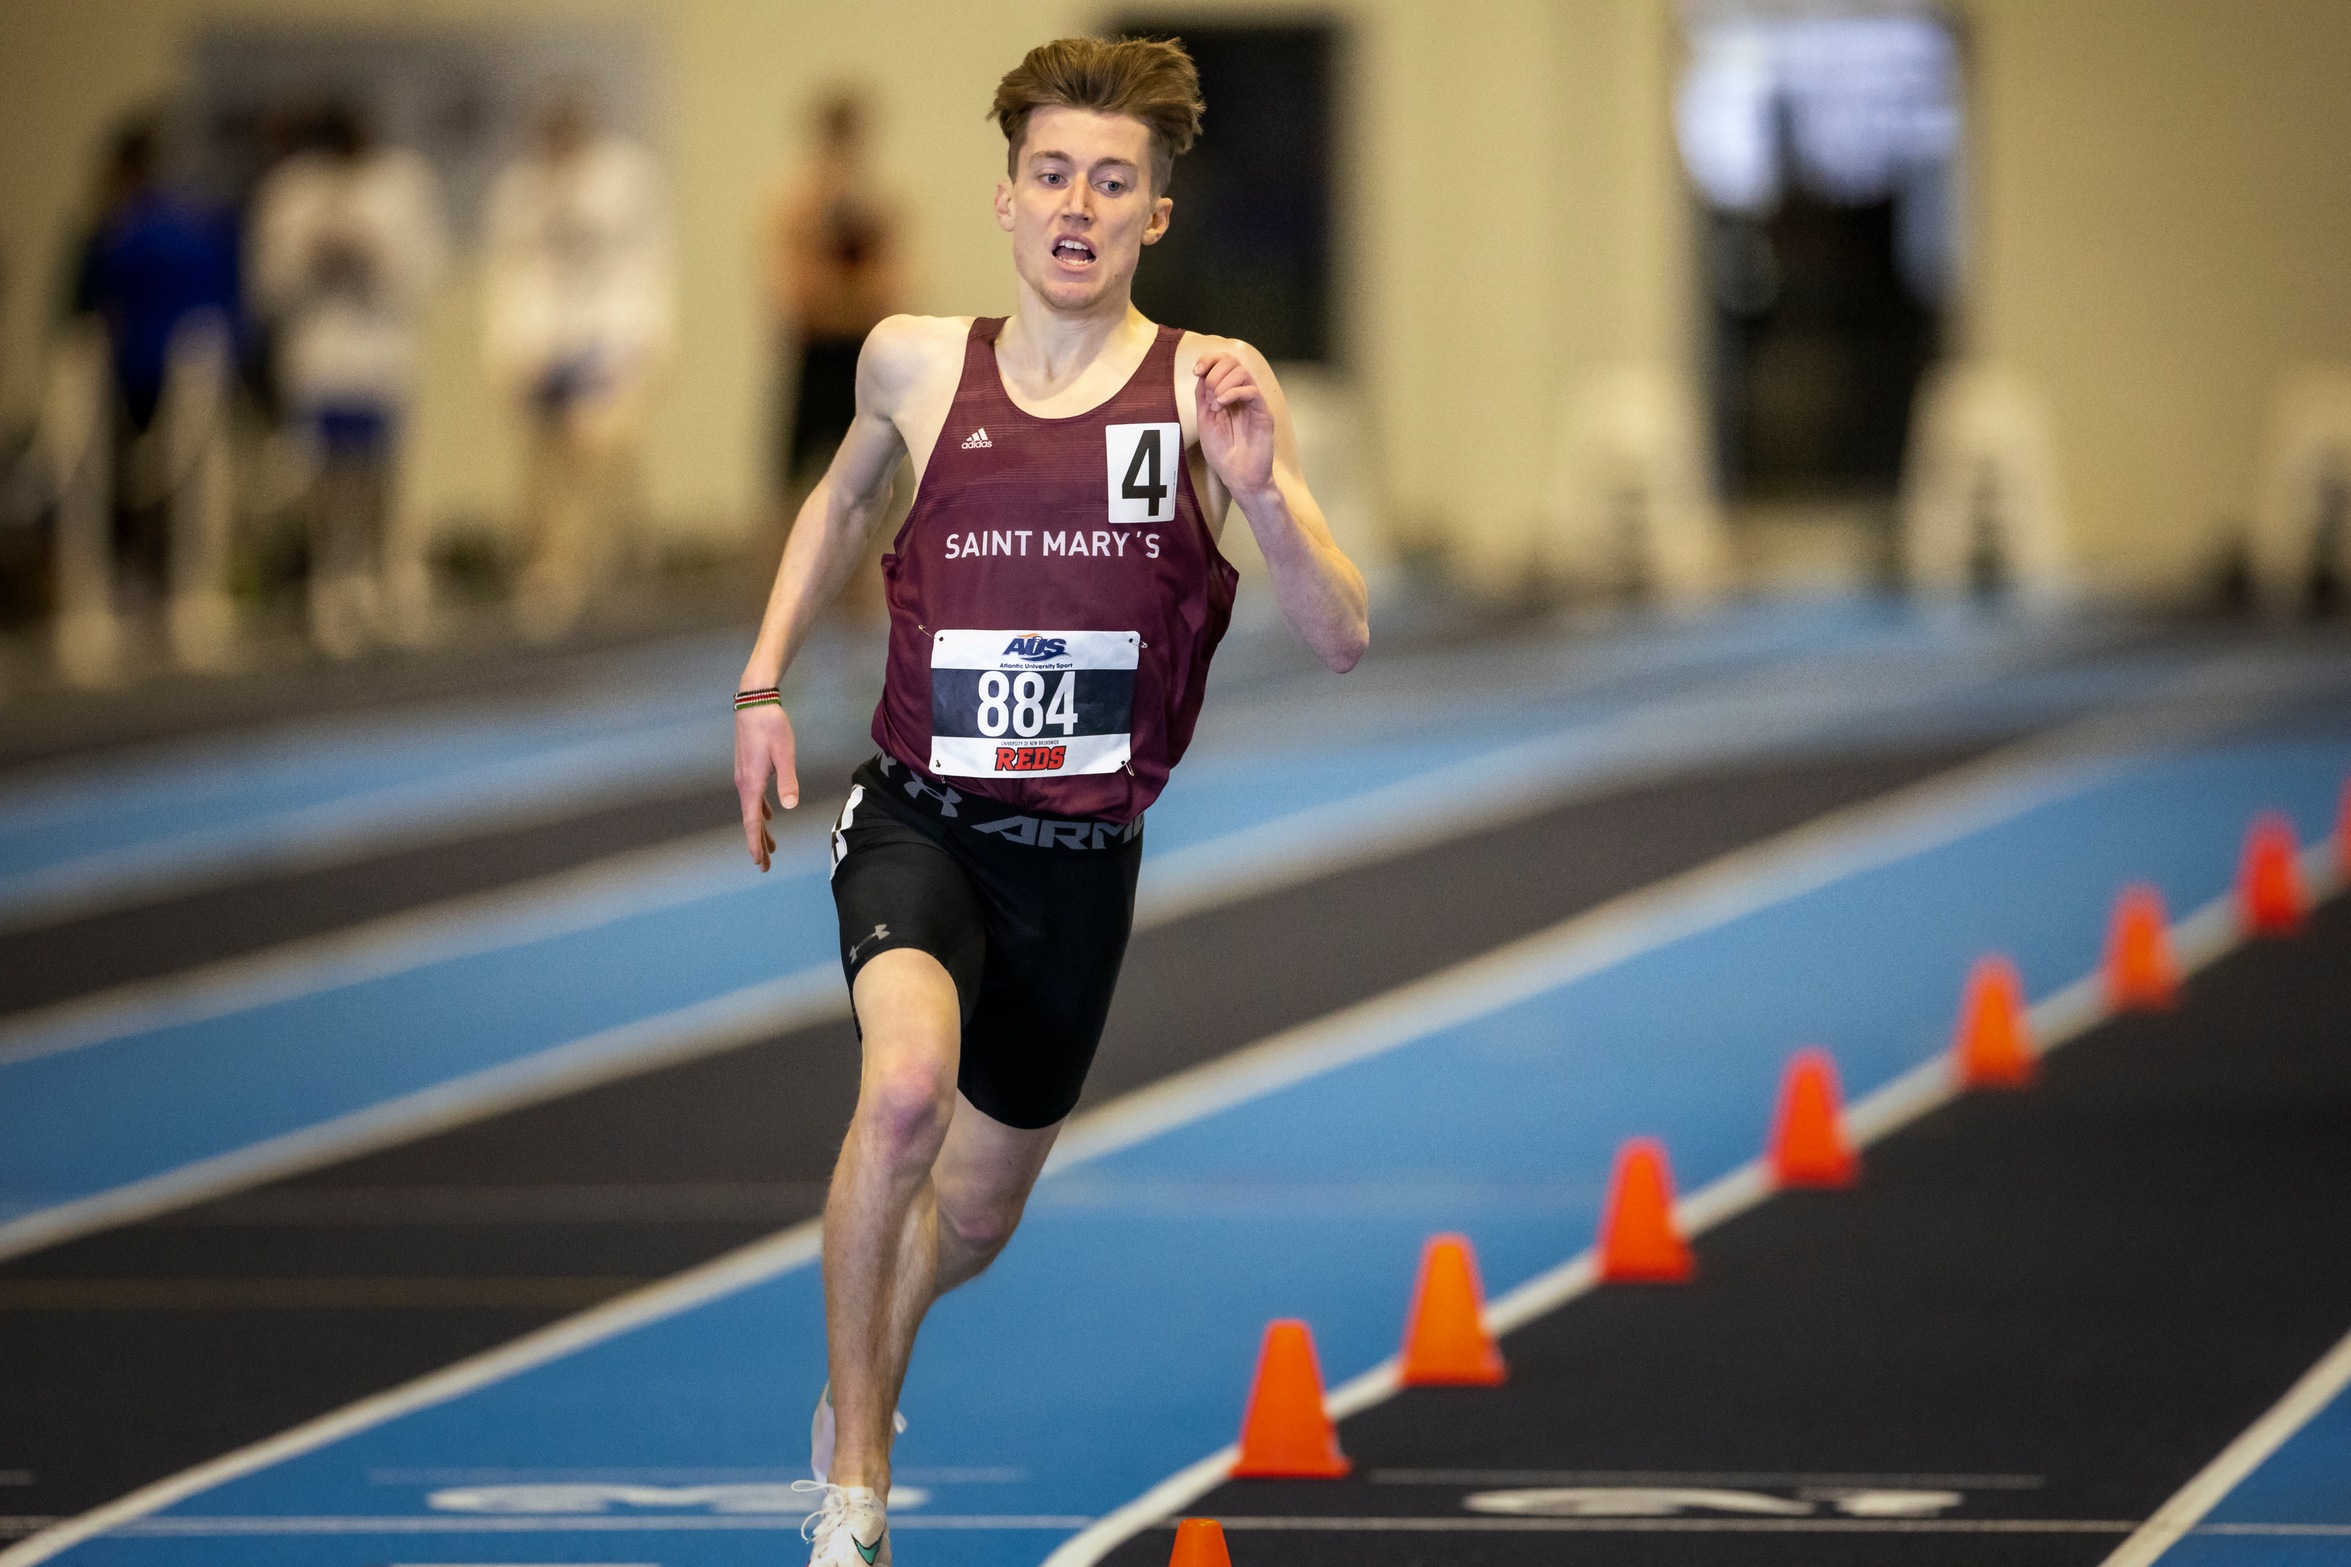 Saint Mary's Huskies track star Andrew Peverill won the Men's 1000m run at the REDS University Invitational on Feb. 19, 2022. With a time of 2:26.21, Peverill ran the auto-qualifying standard to compete at the U SPORTS Championships being hosted by UNB next month!